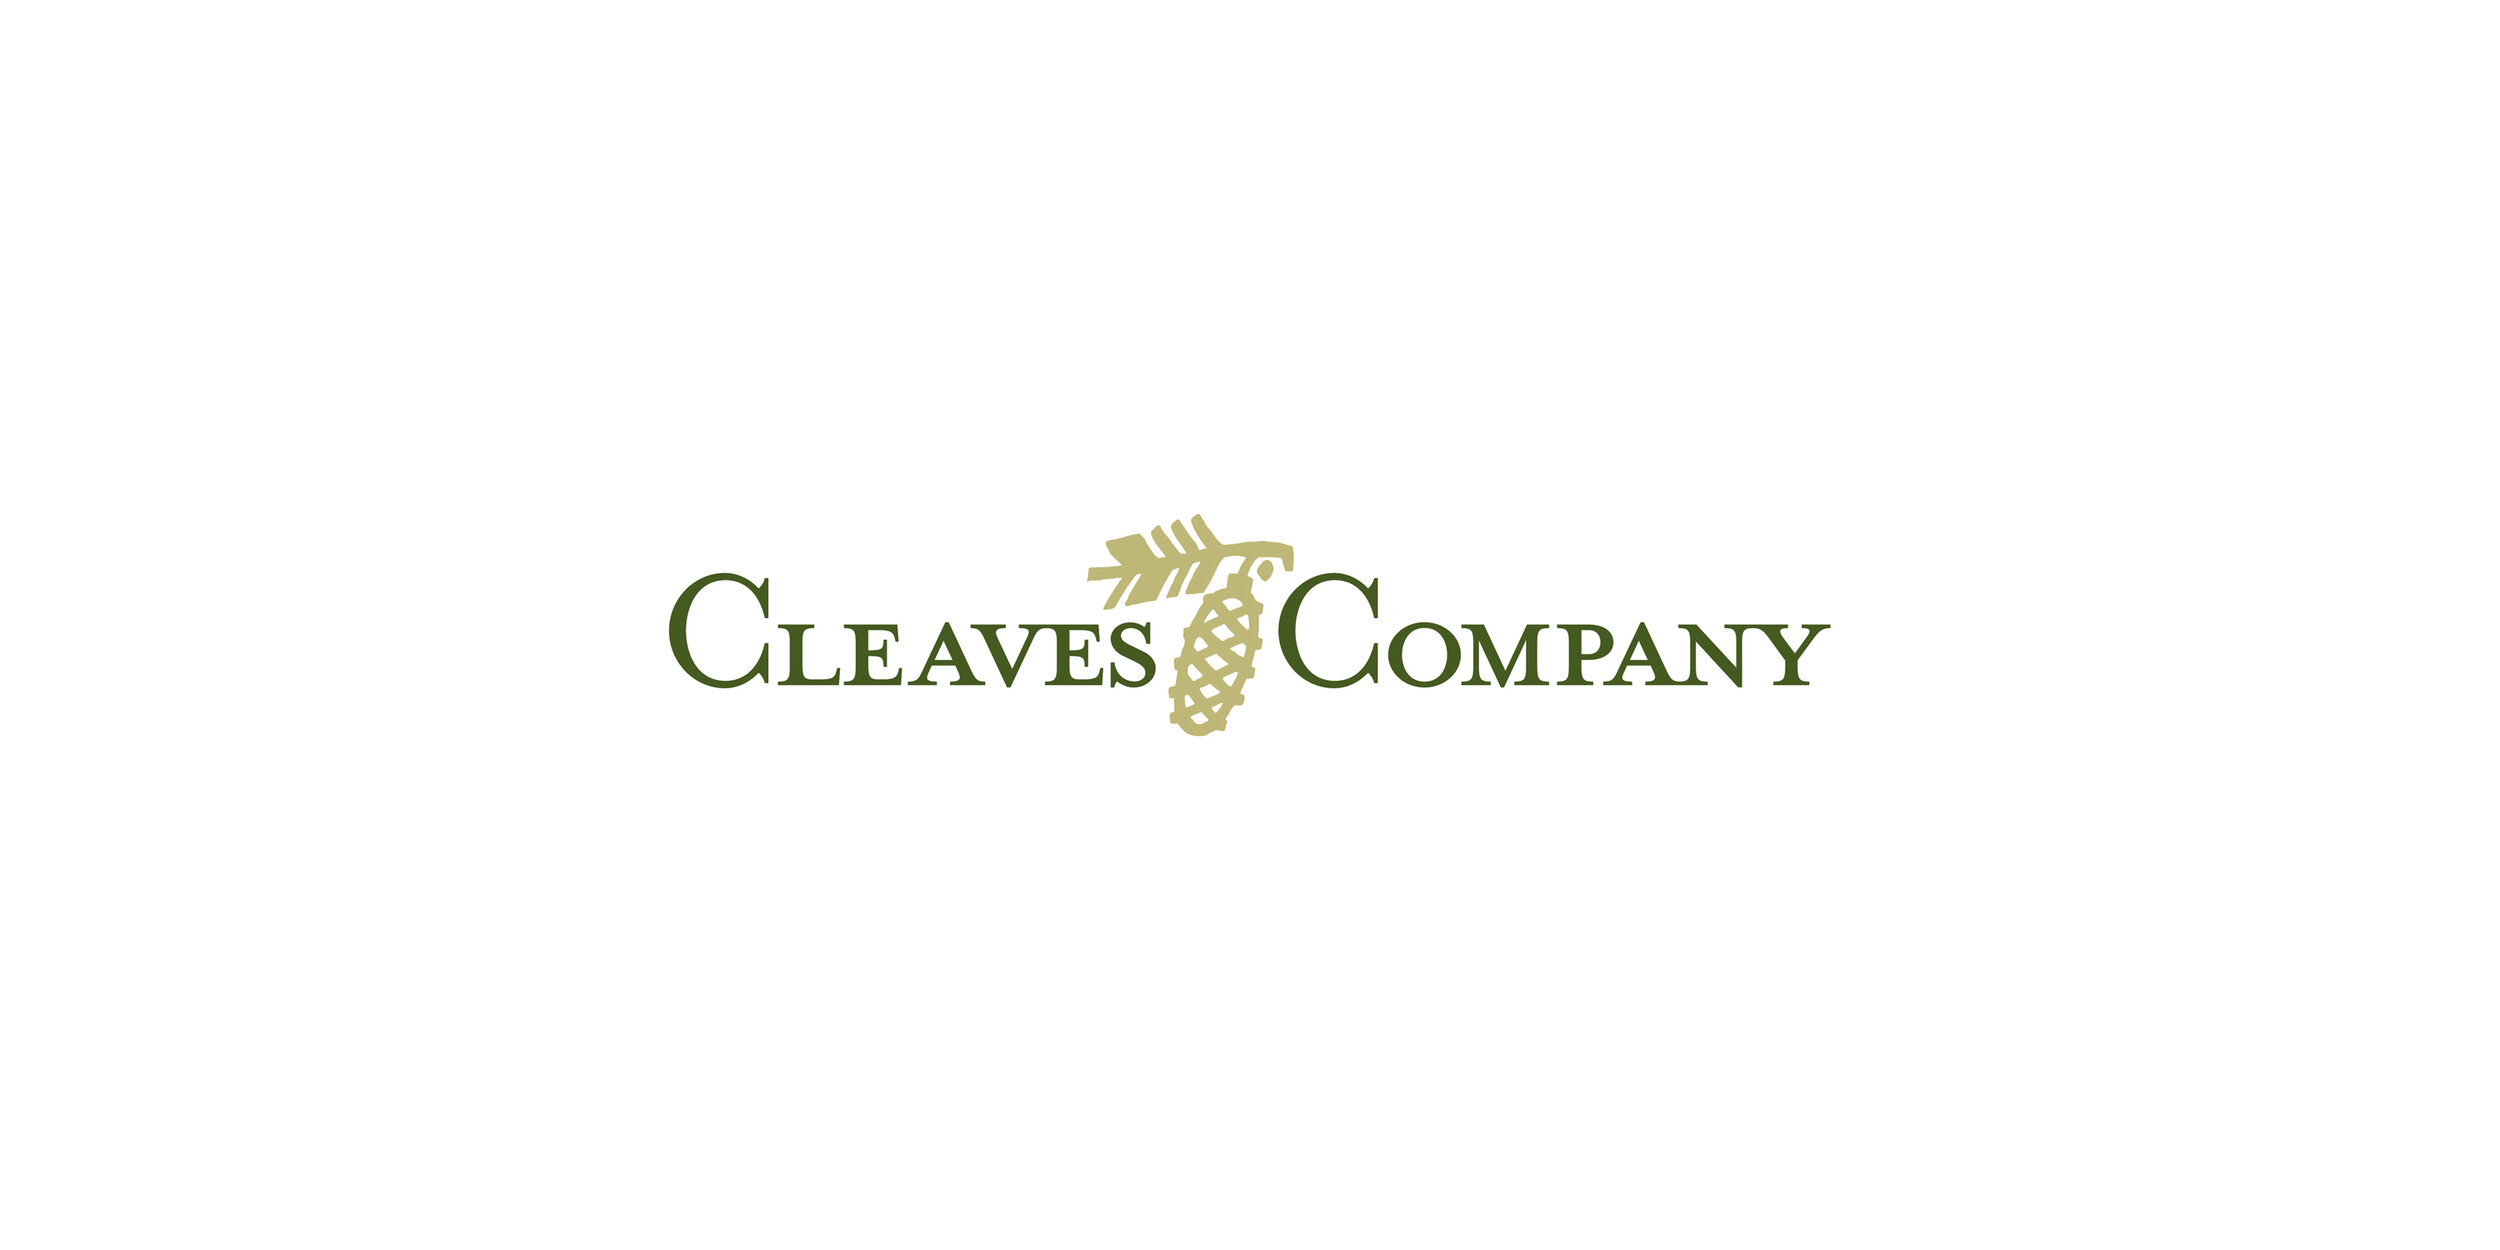 Cleaves & Company